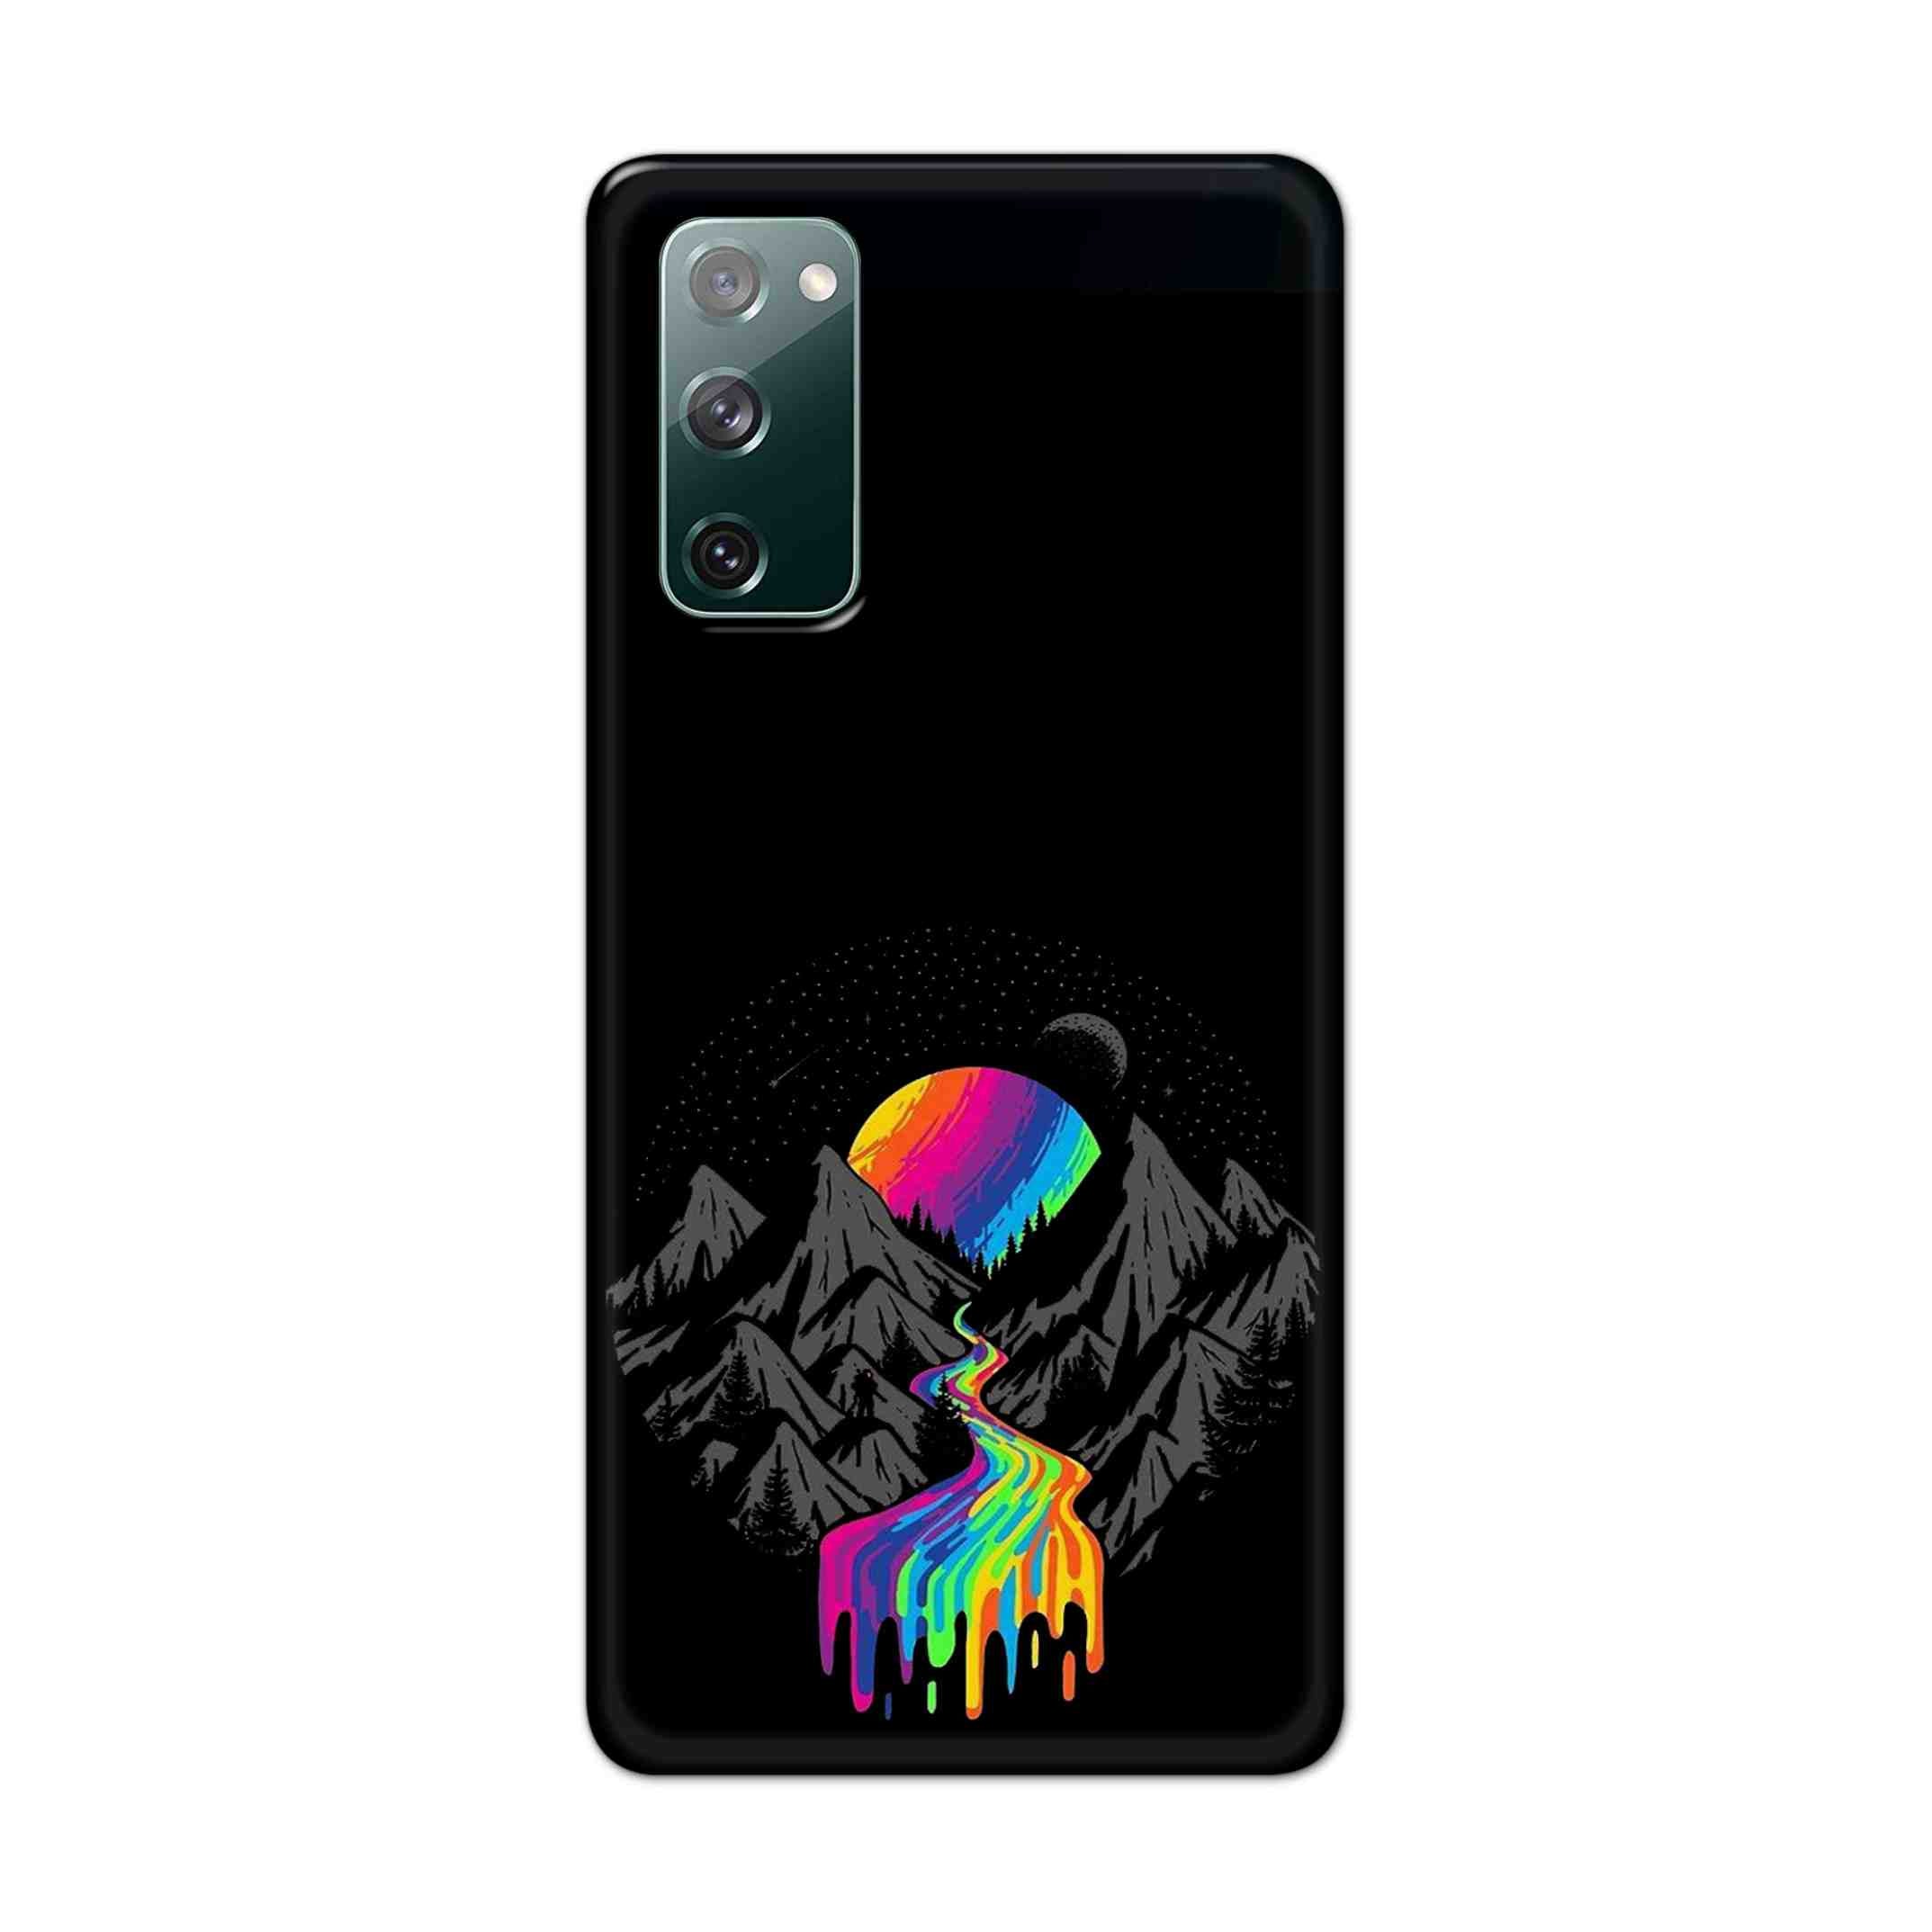 Buy Neon Mount Hard Back Mobile Phone Case Cover For Samsung Galaxy S20 FE Online